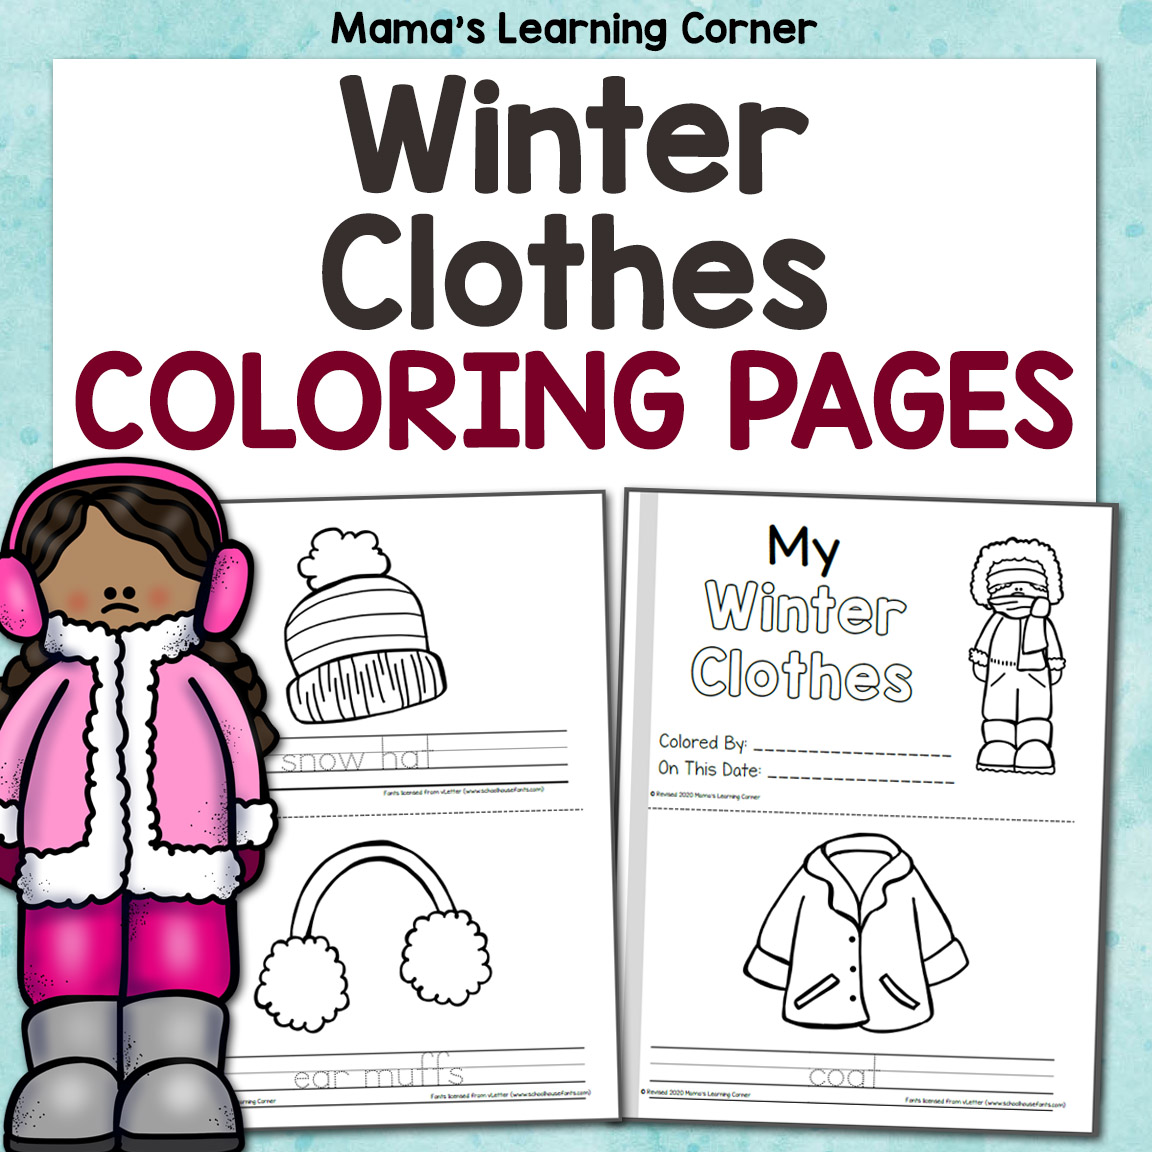 wardrobe coloring pages